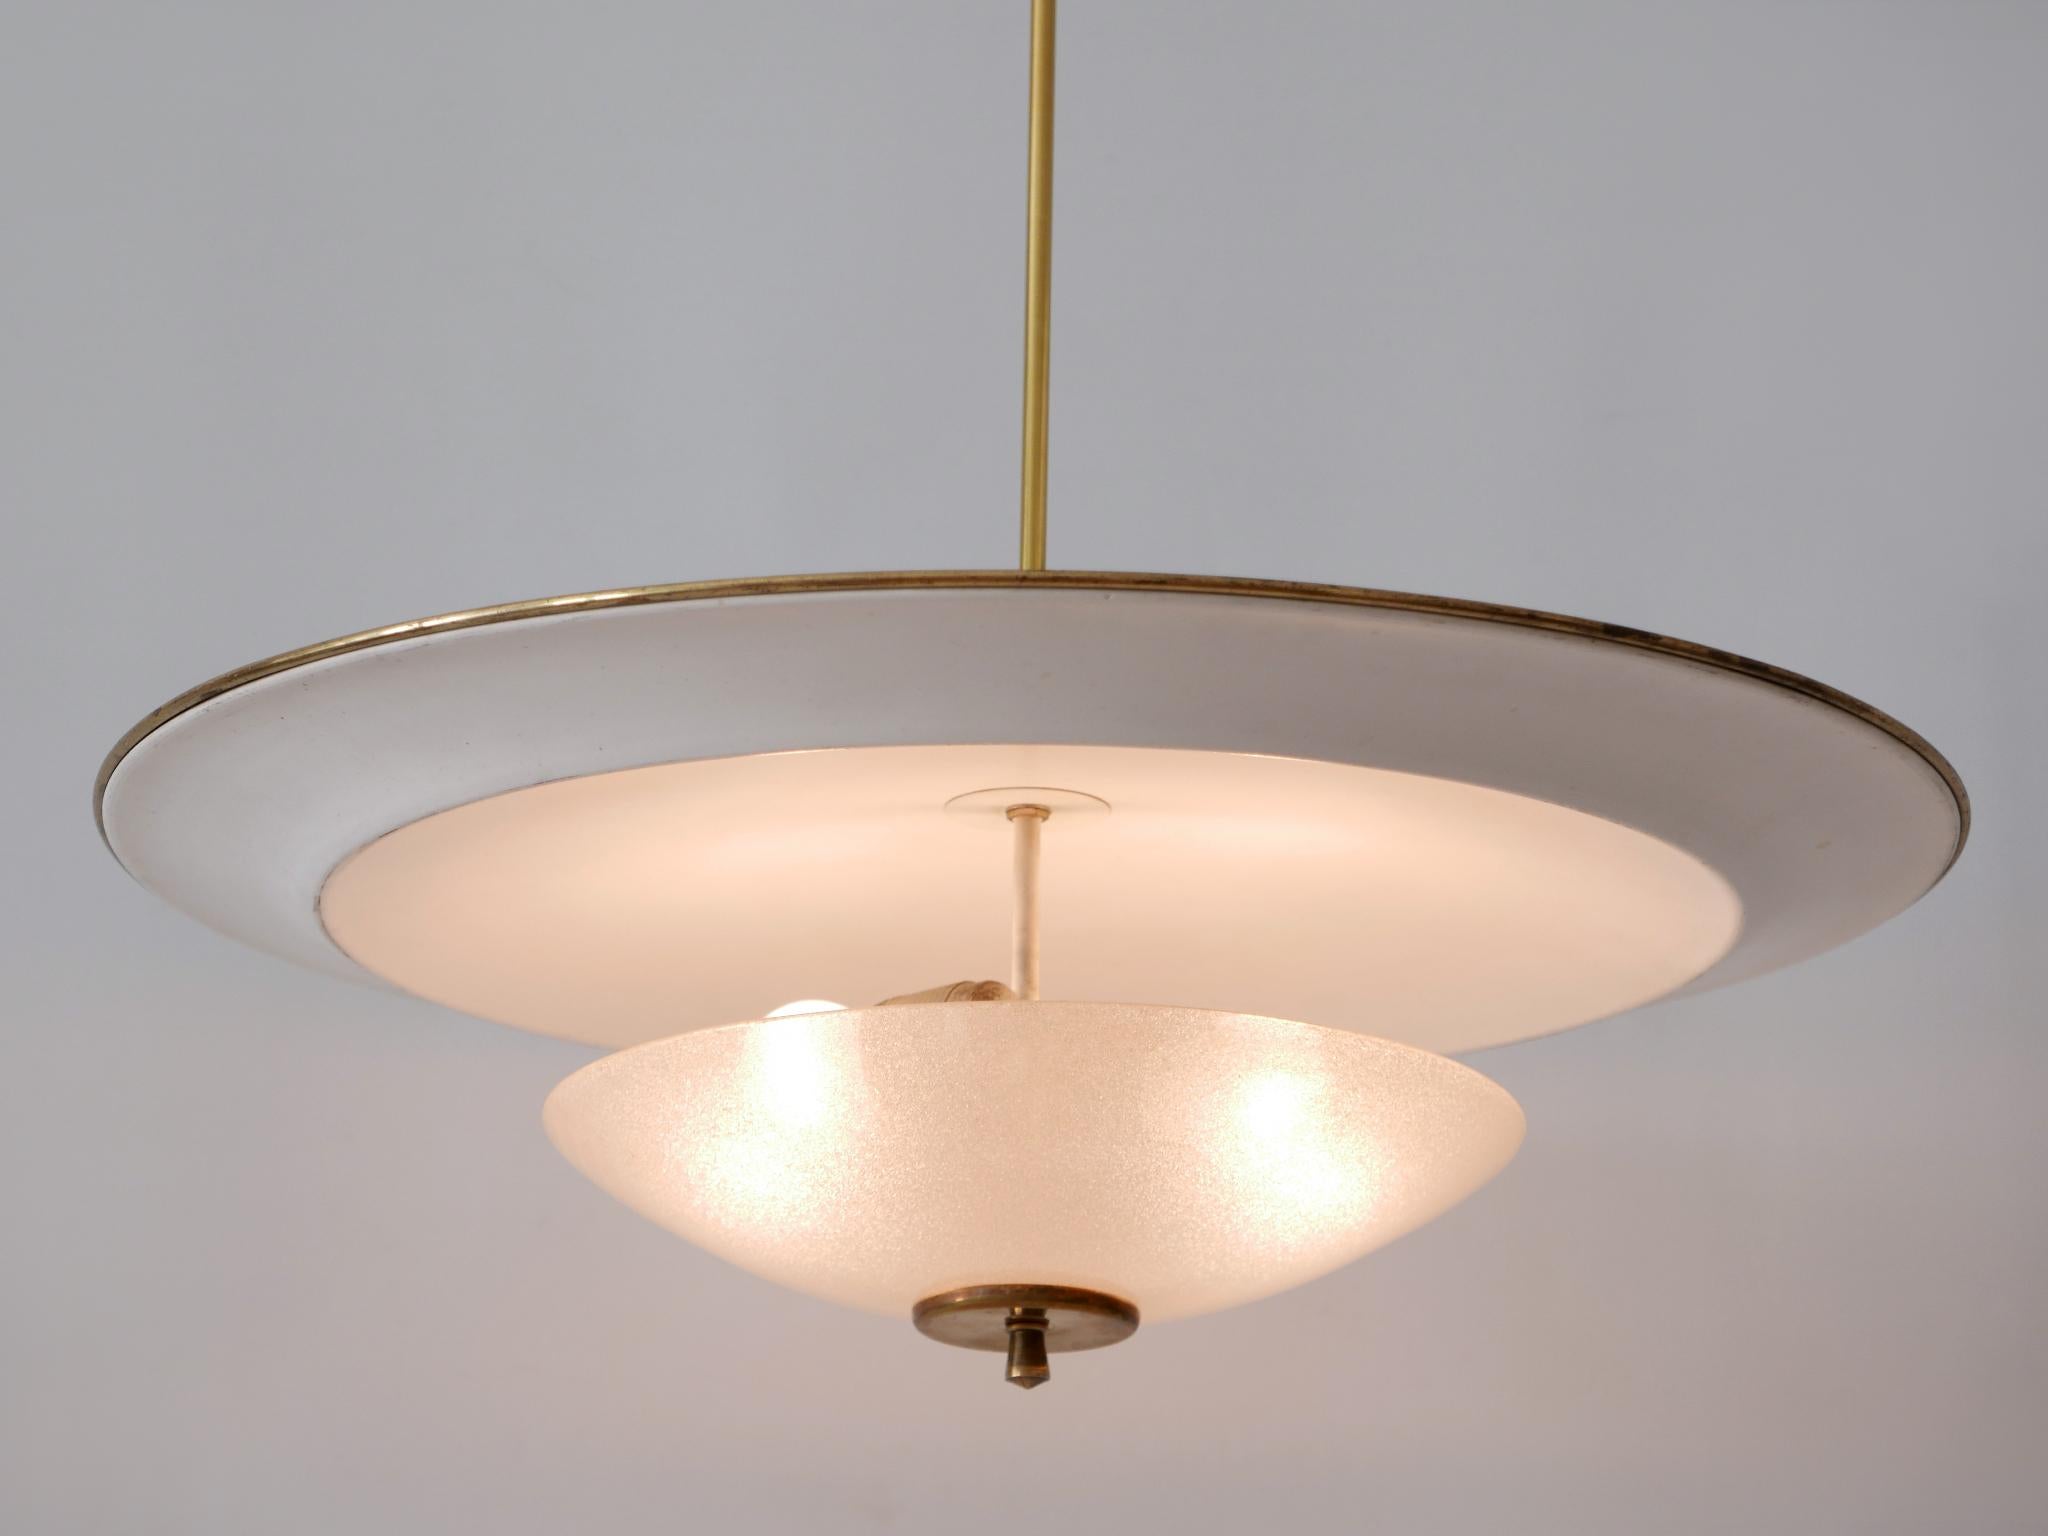 Large Mid-Century Modern 'Ufo' Ceiling Light or Pendant Lamp Germany 1950s № 2 For Sale 5